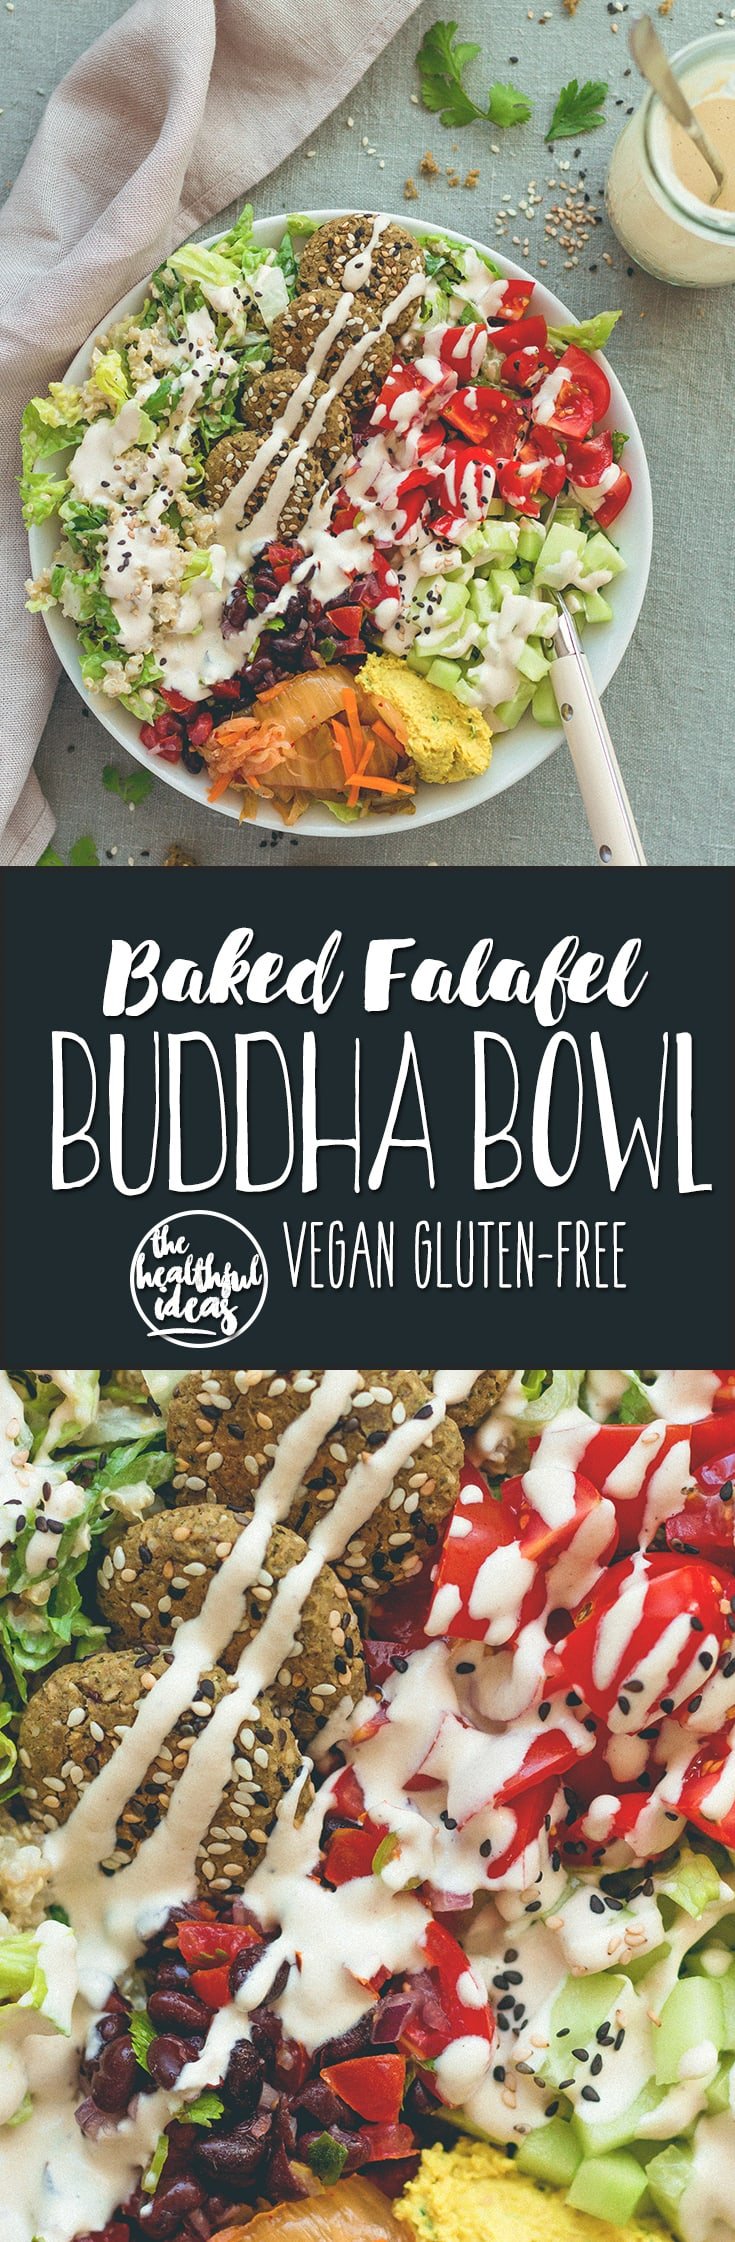 Baked Falafel Buddha Bowl - these falafels are healthy, easy, to make, gluten-free, vegan, and totally delicious! You'll love this recipe! | thehealthfulideas.com